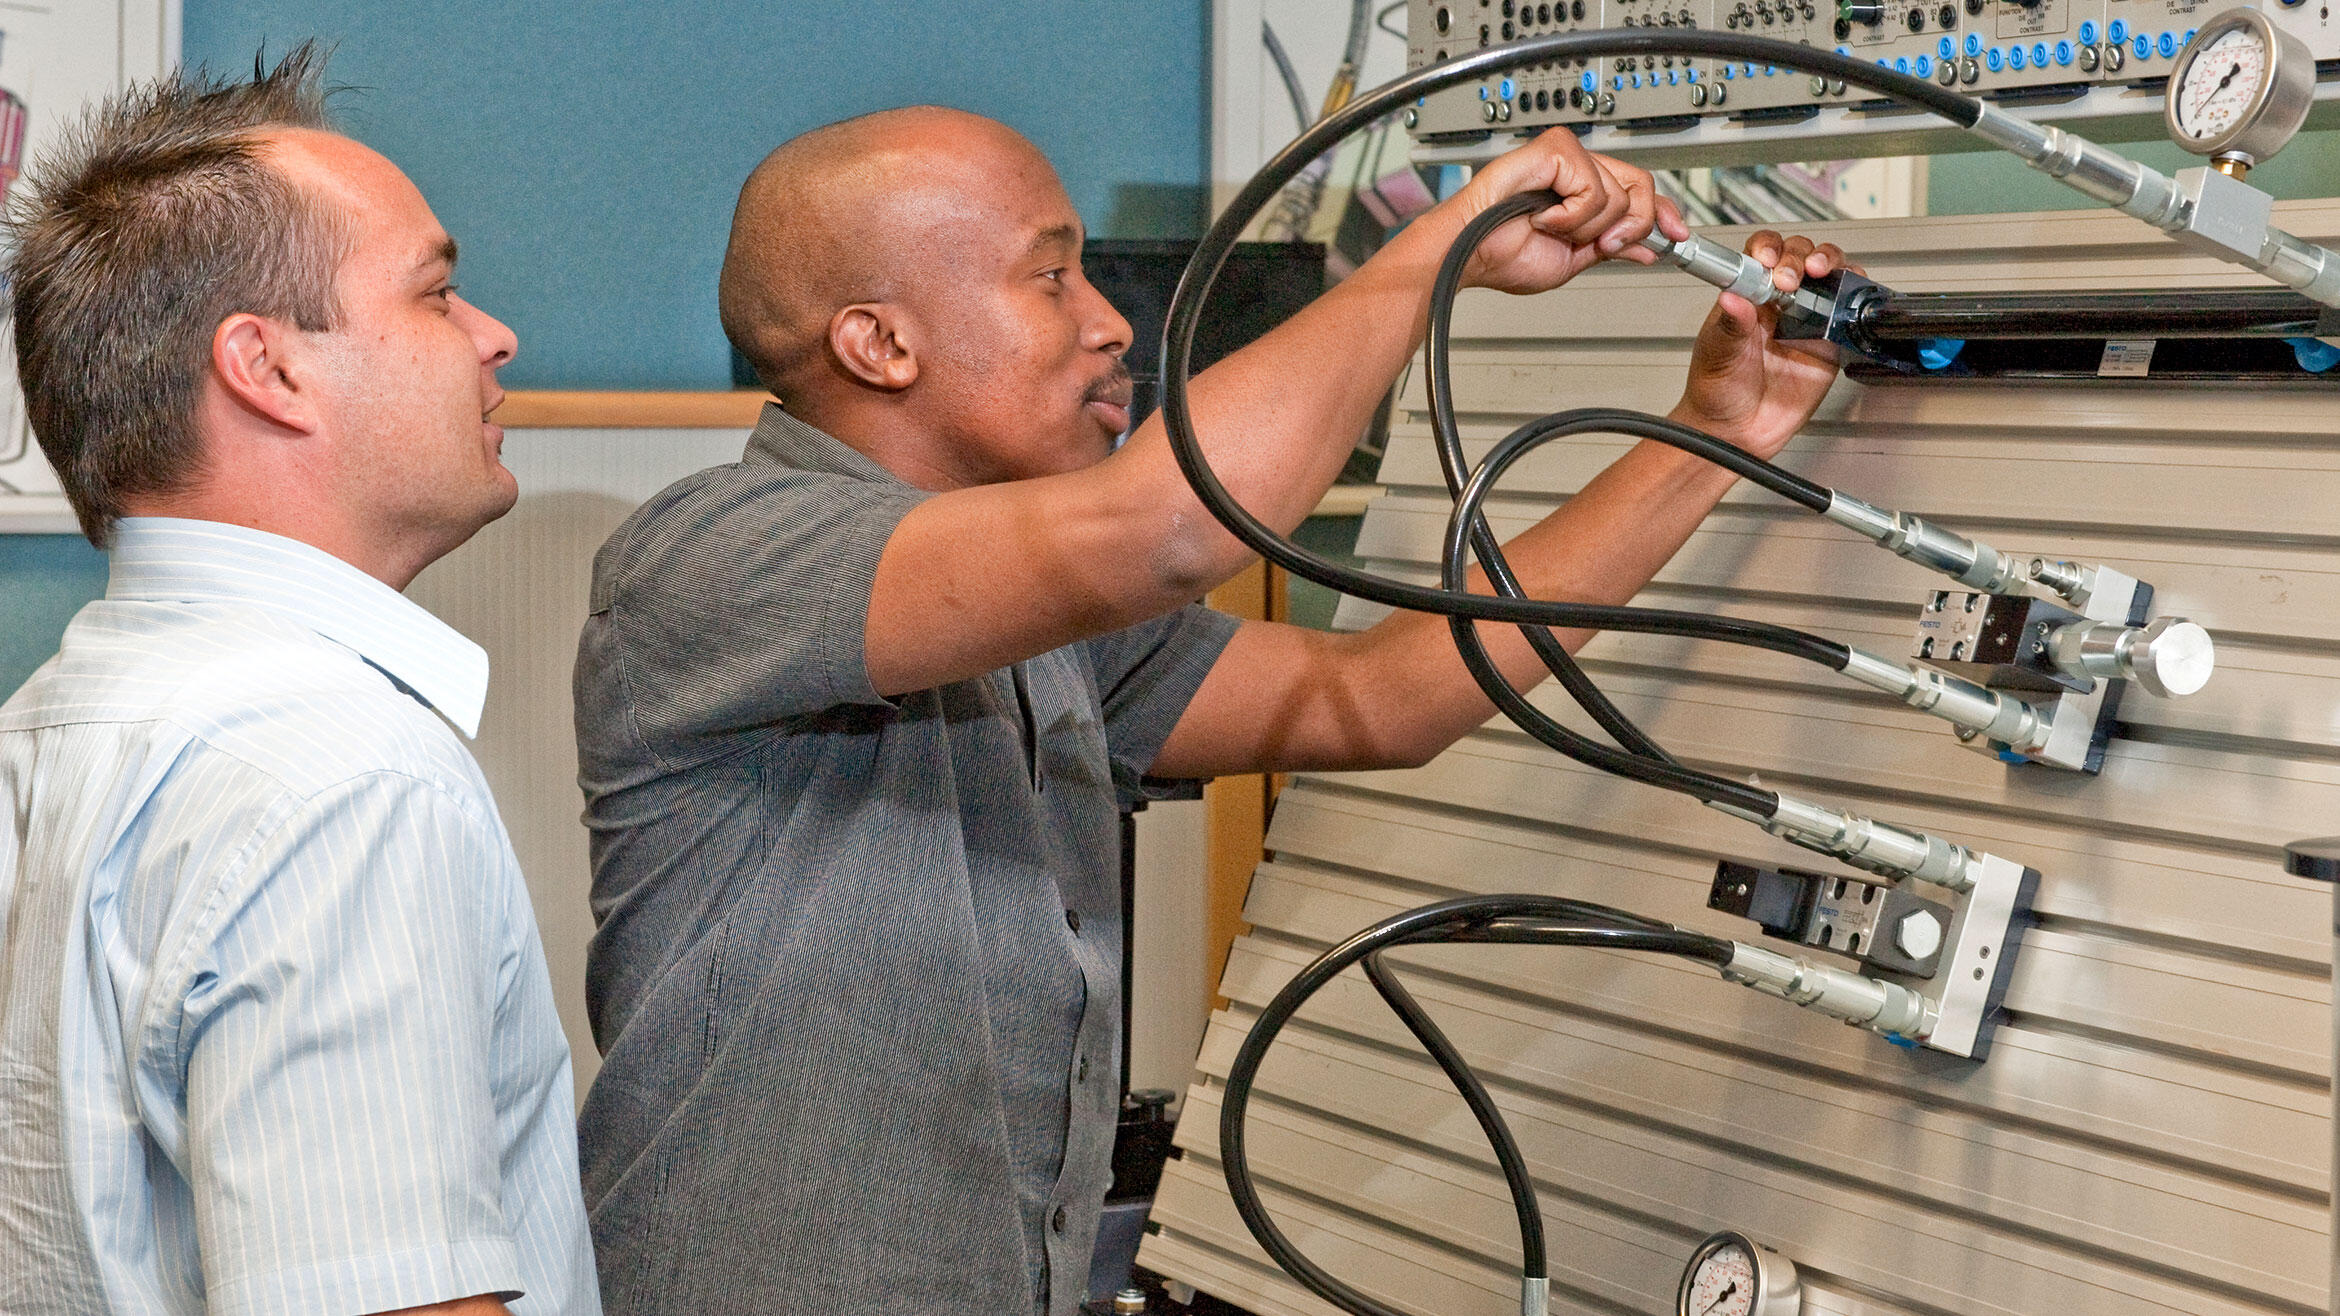 two men connect hoses to a training facility